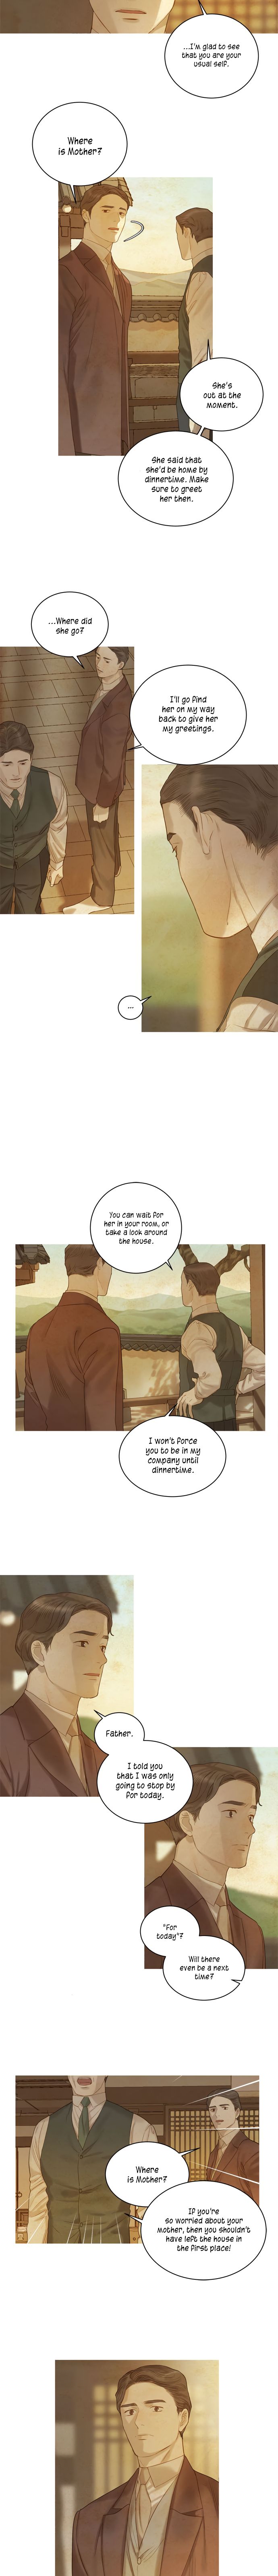 Gorae Byul - The Gyeongseong Mermaid - Chapter 33 Page 4